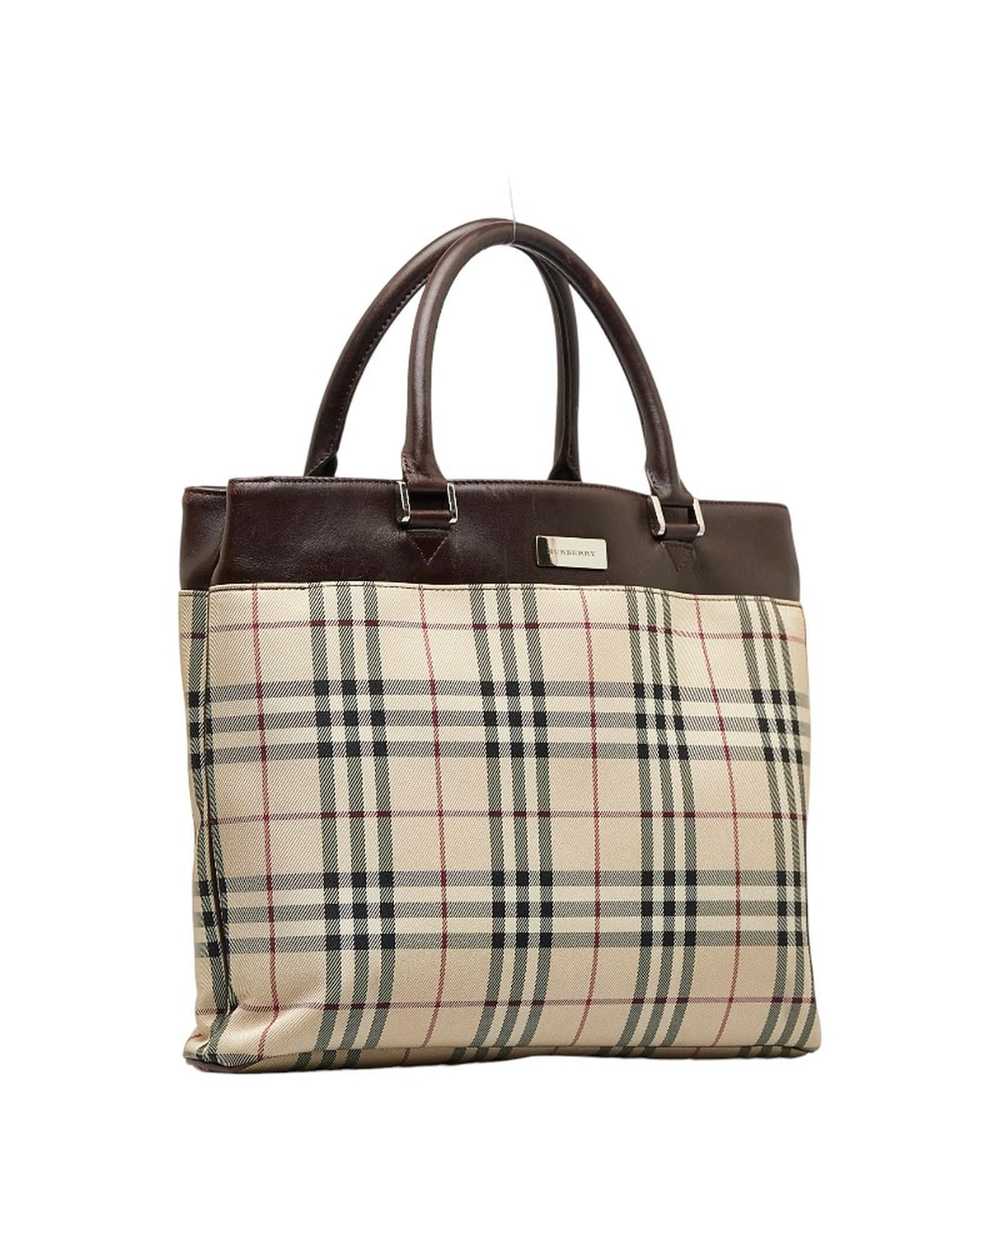 Burberry Classic Check Tote Bag in Brown - image 2